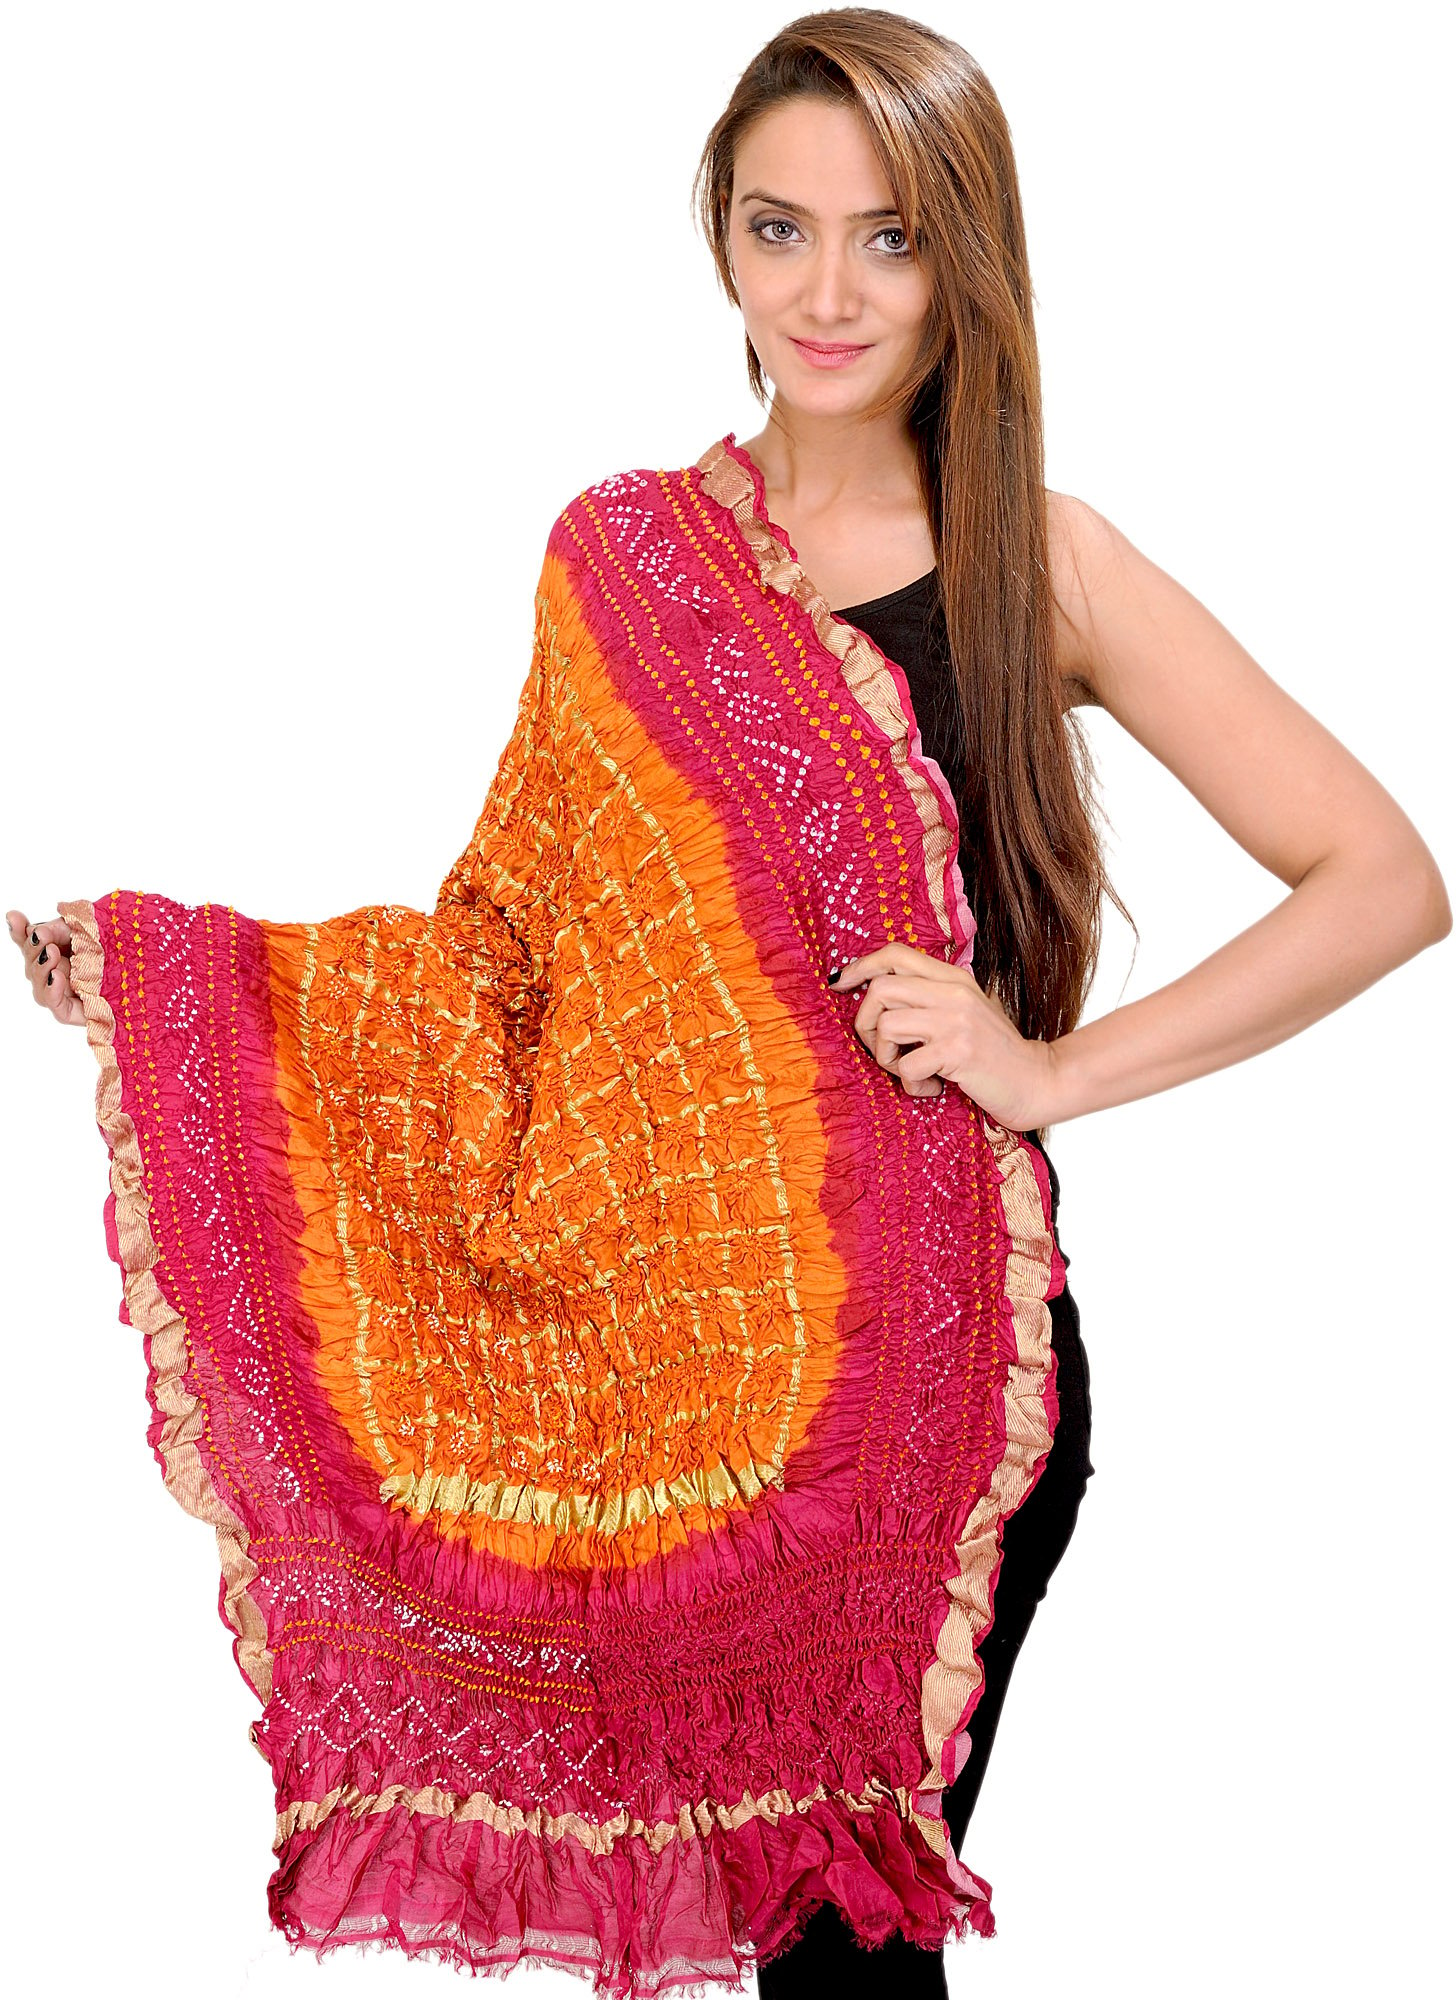 Exotic India Bandhani Tie-Dye Gharchola Dupatta from Jodhpur with Golden Thread Weave 